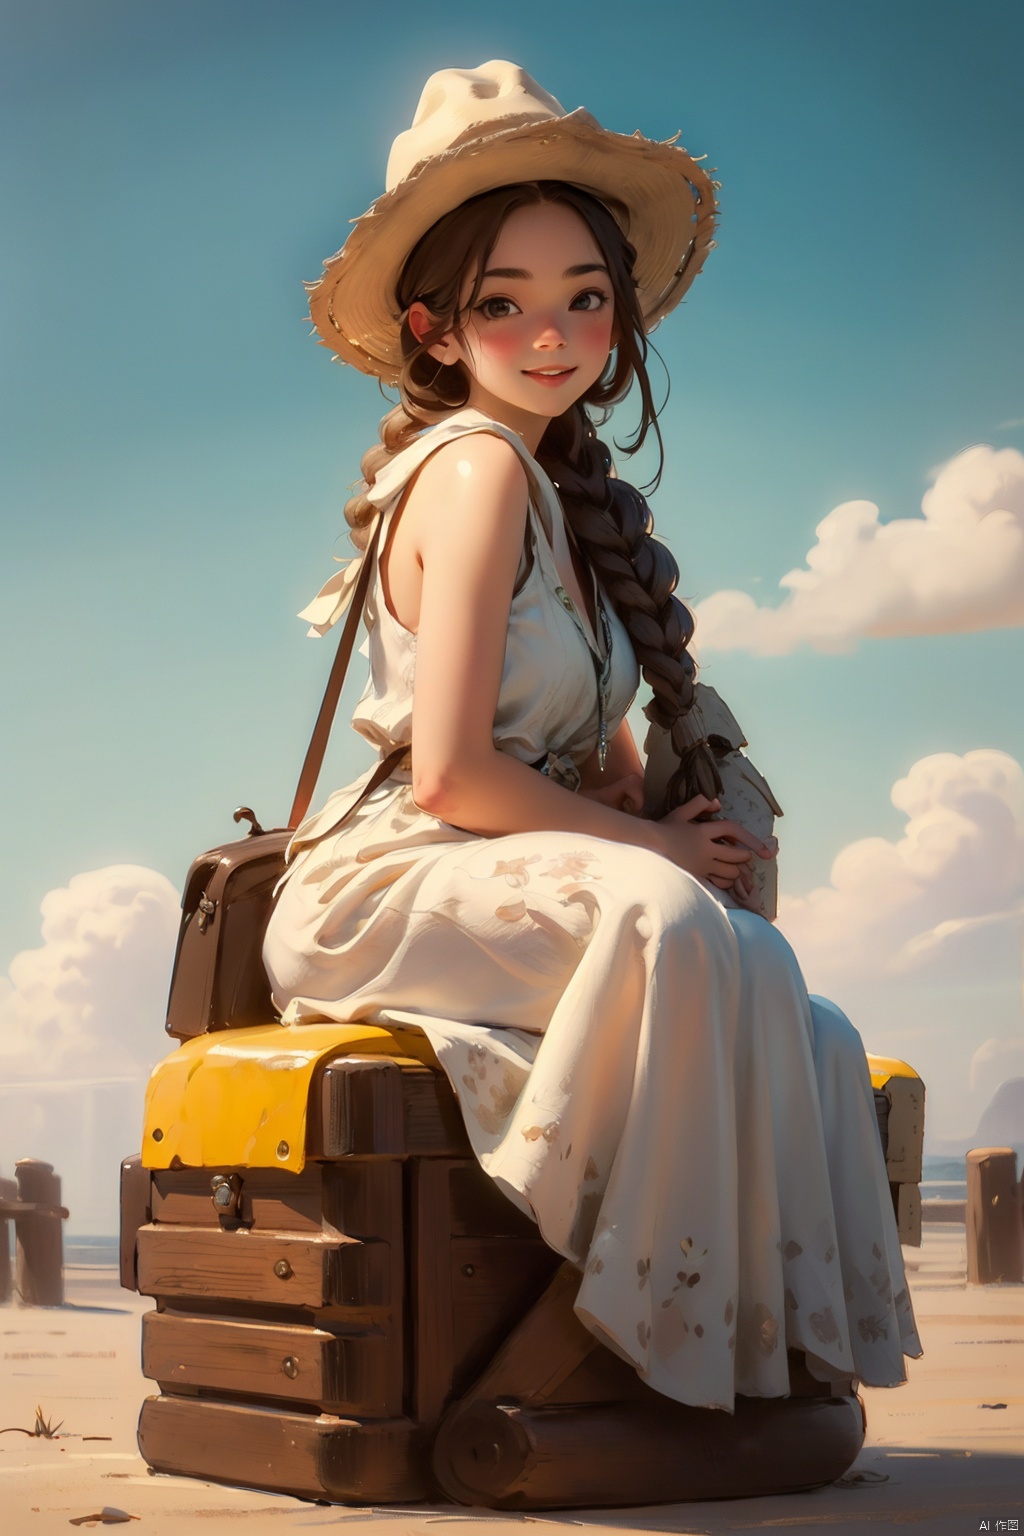 masterpiece, best quality, 8K,illustration, colorful, The rich visuals depict the joy of outdoor travel. car  Vacation girl, a girl White vest, This is a very thin girl, not very plump, Black Fried Dough Twists Braid and black eyes, Sitting on the ground with your back against a yellow car. Wearing a cowboy hat on the head , best qualityhighly detailed, realistic rendering, Cute Smiling Girl。This painting captures the essence of innocence, beauty, and joy, making it a beautiful and captivating artwork, Fully express the joy of the character's vacatin, The girl should be thinner, Girls' clothes should not be too revealing , Hair fluttering in the wind,Clearly display feet and hands, domineering lady